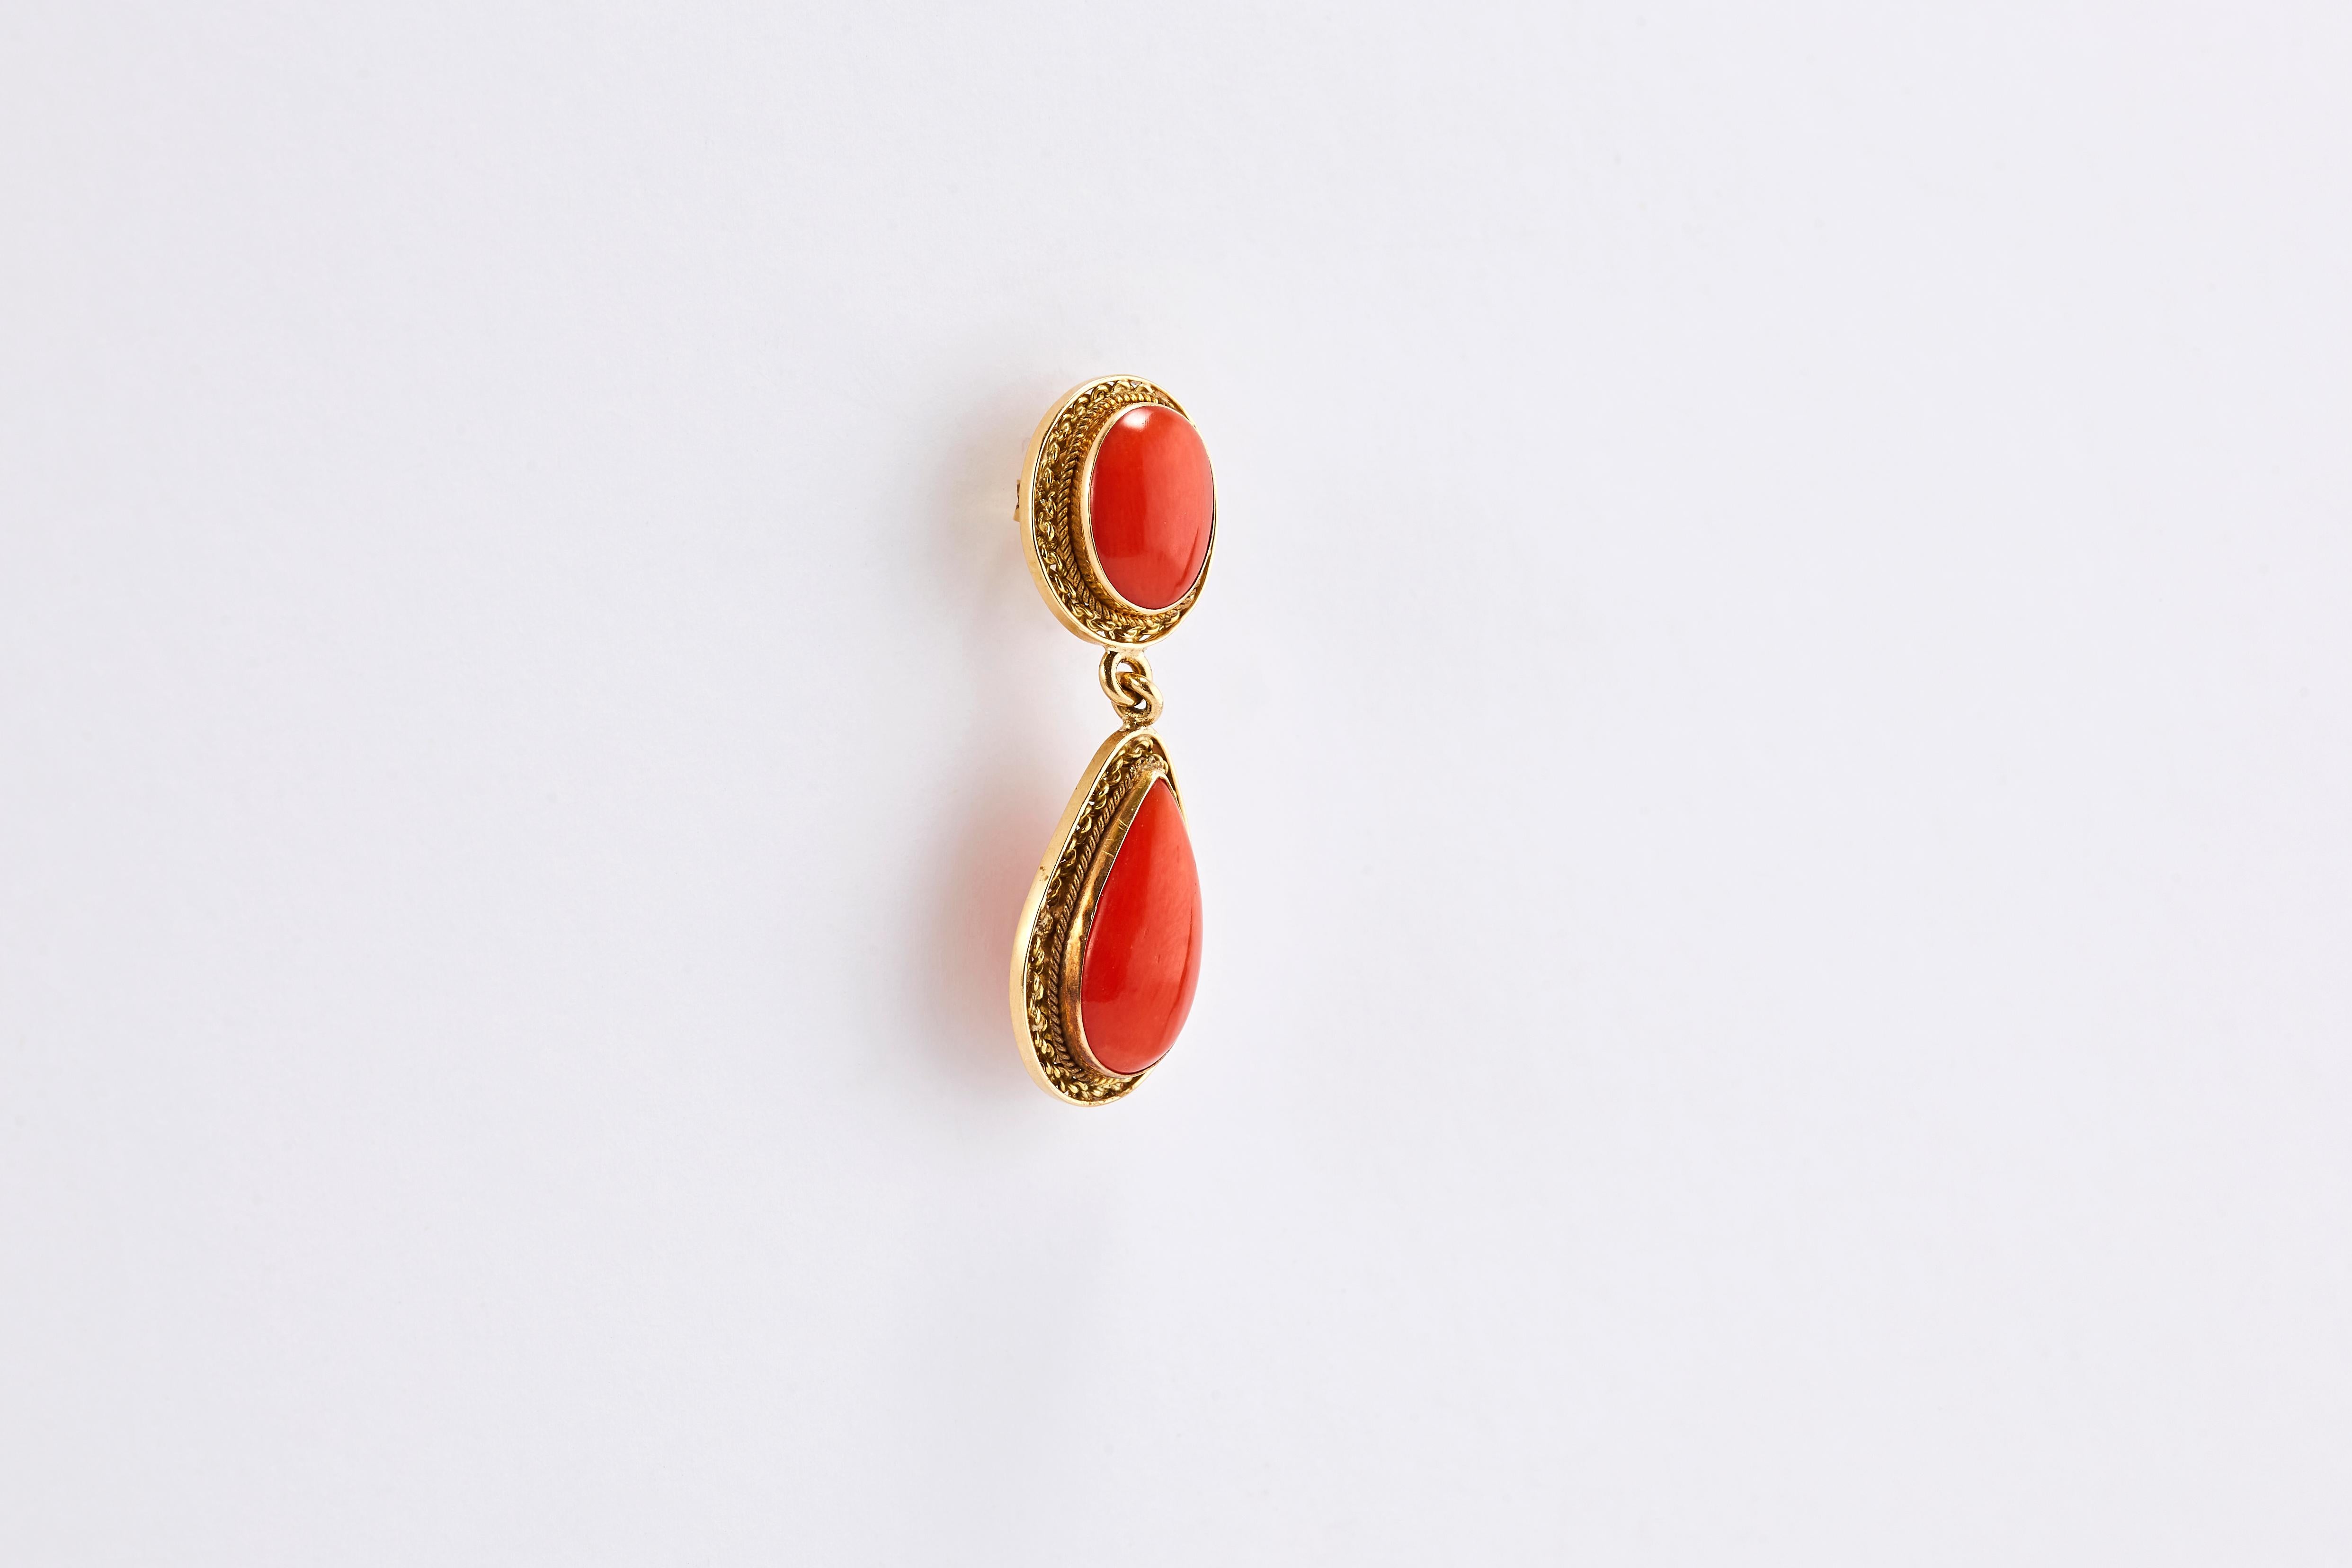 Pair of 18K Yellow Gold and Coral Drop Earrings 

Made in Italy in the 80s.
Beautiful coral gold earrings with an antique look. Each earring has 2 corals, an oval one on the top and a pear shape one on the part that drops.

Total weight: 6.05 grams.